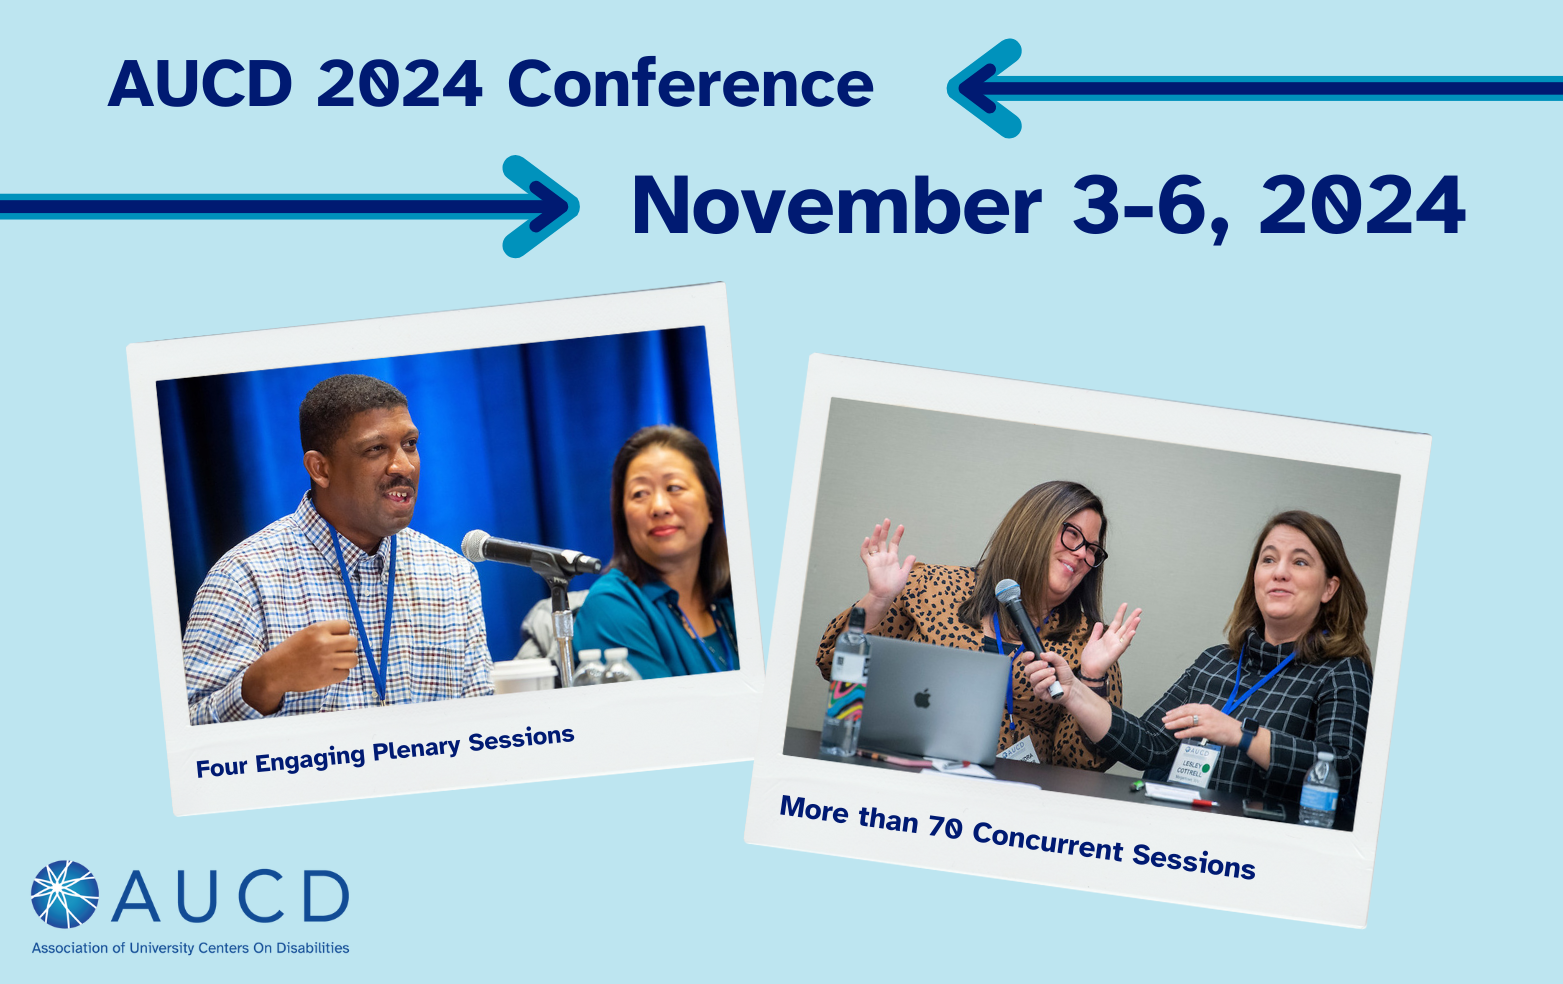 Graphic shows polaroid framed images of two speakers at a plenary session and two speaker of a concurrent session. Graphic reads: AUCD 2024 Conference, November 3-6, 2024. 